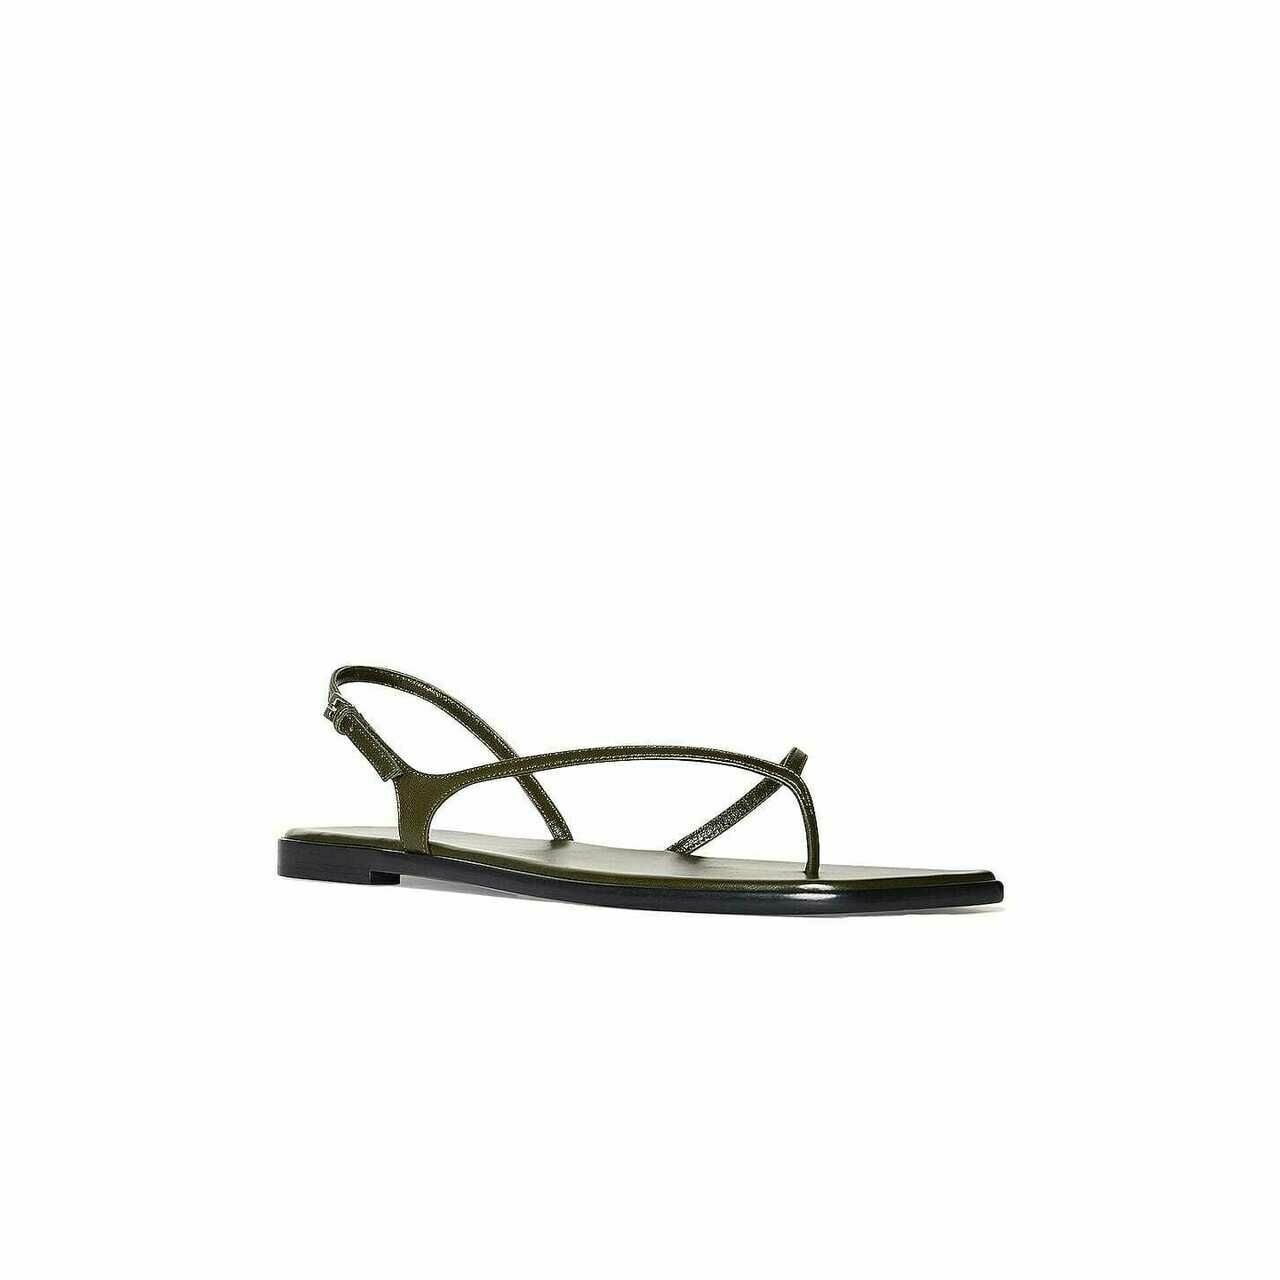 The Row Olive Sandals